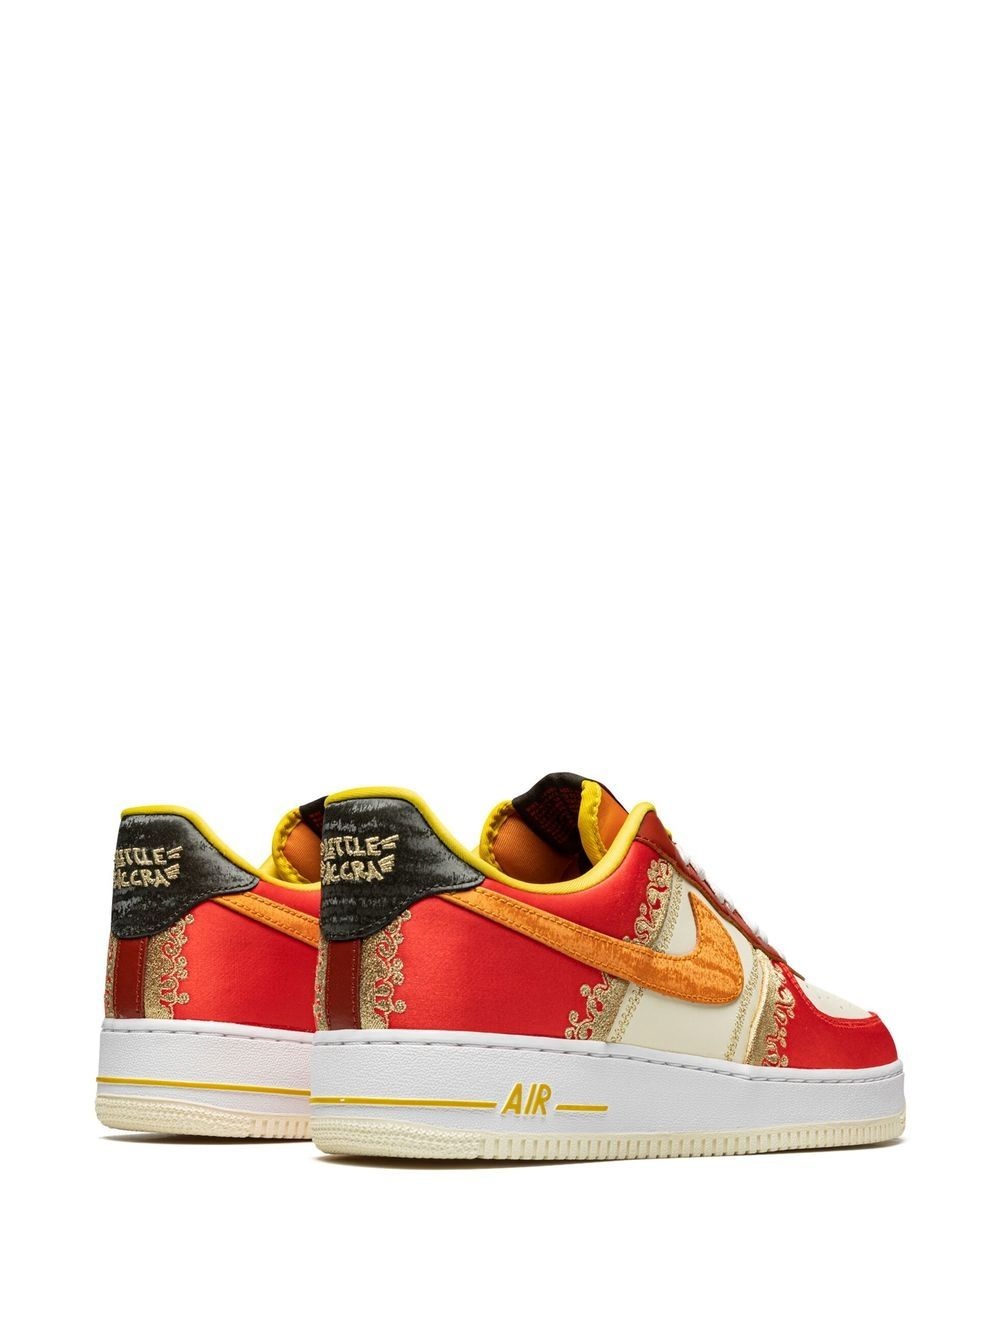 Air Force 1 Low '07 "Little Accra" sneakers - 3